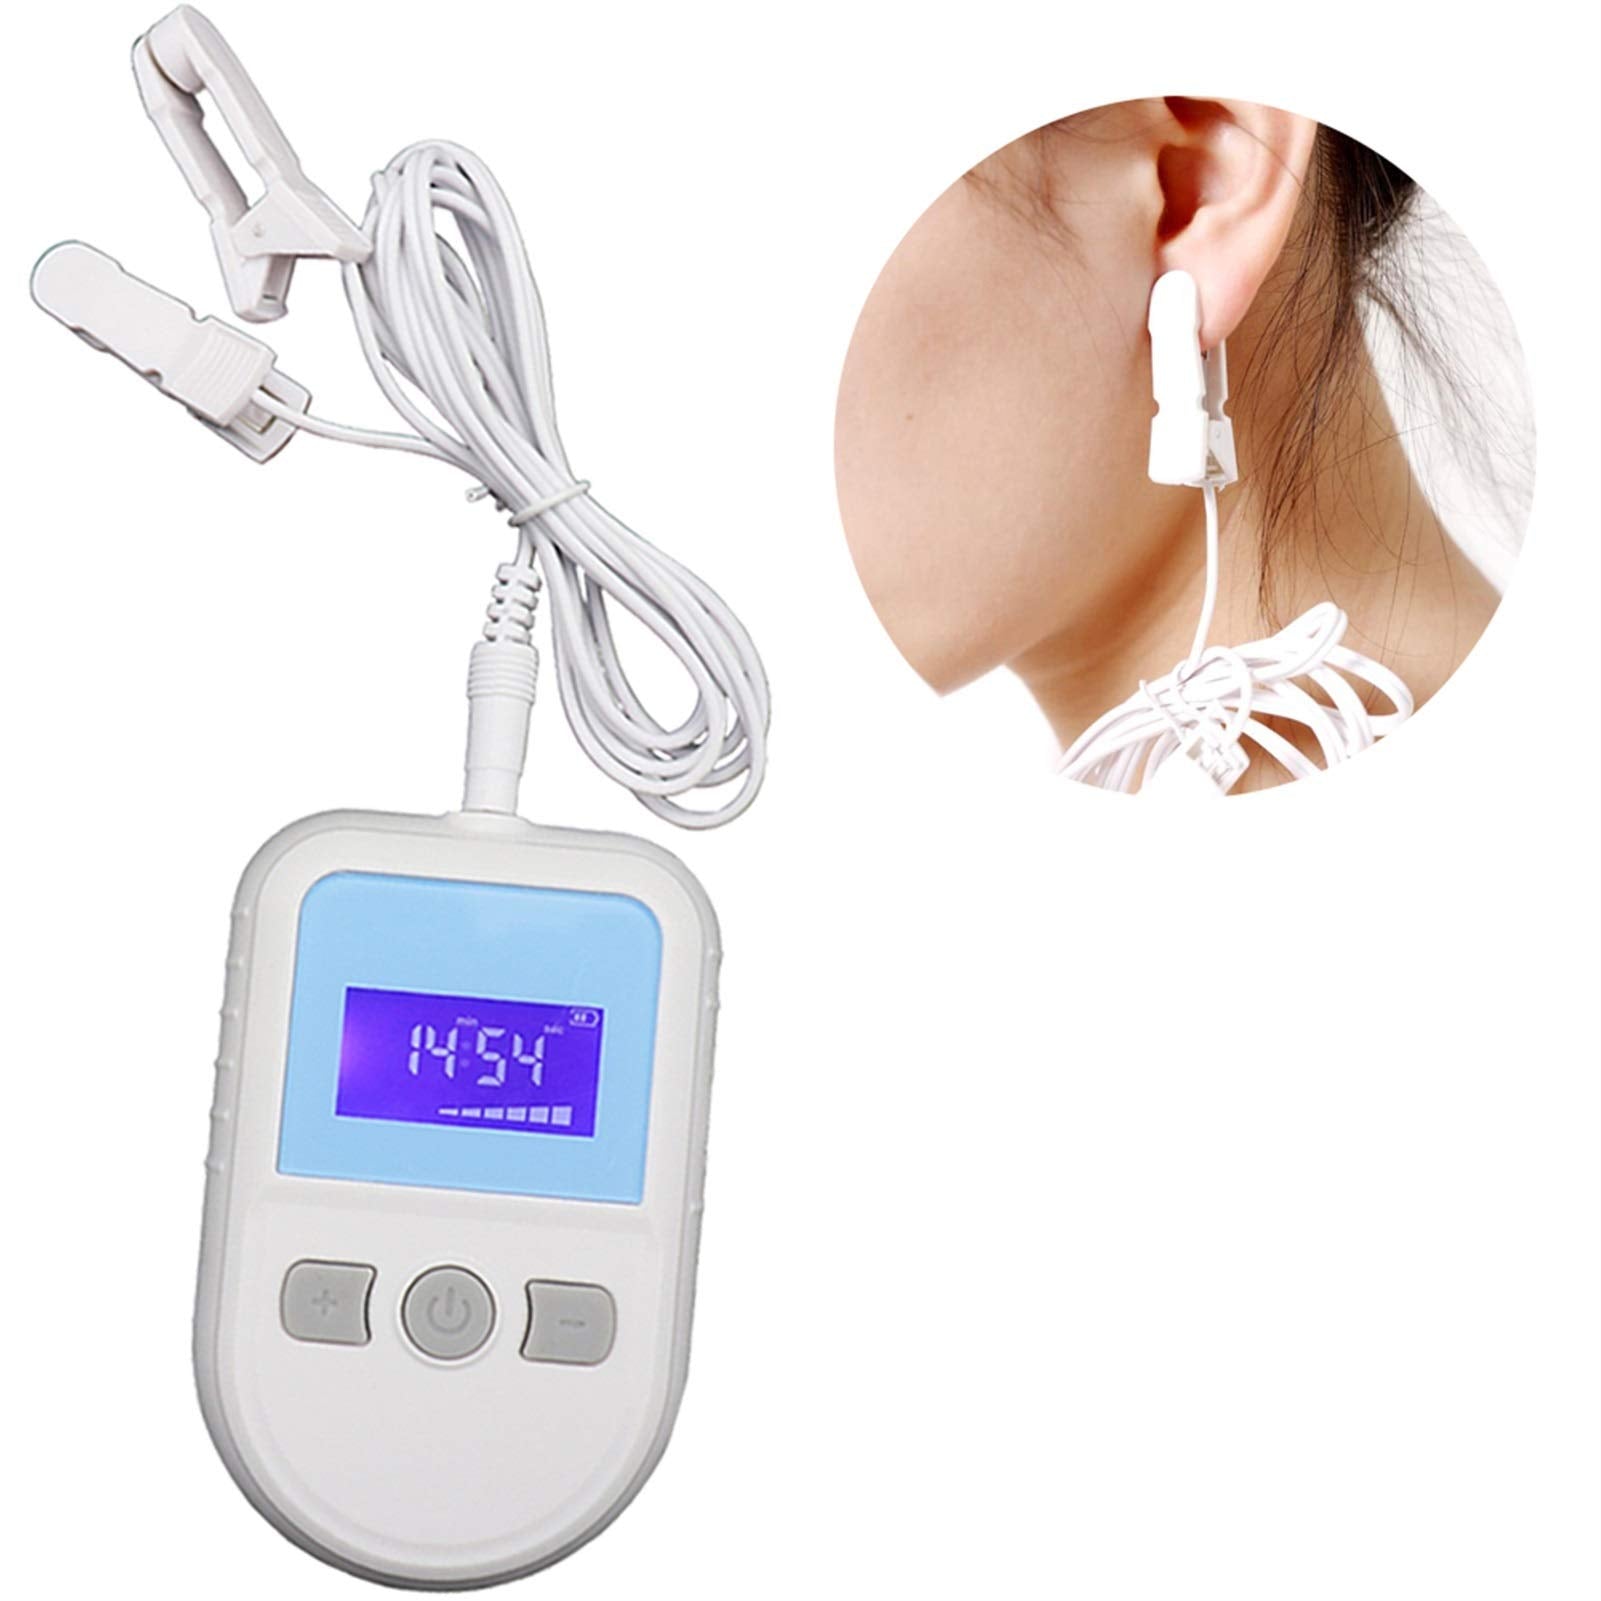 CES Device Brain Electronic Therapy - Stimulation Device Massage Ear Clip